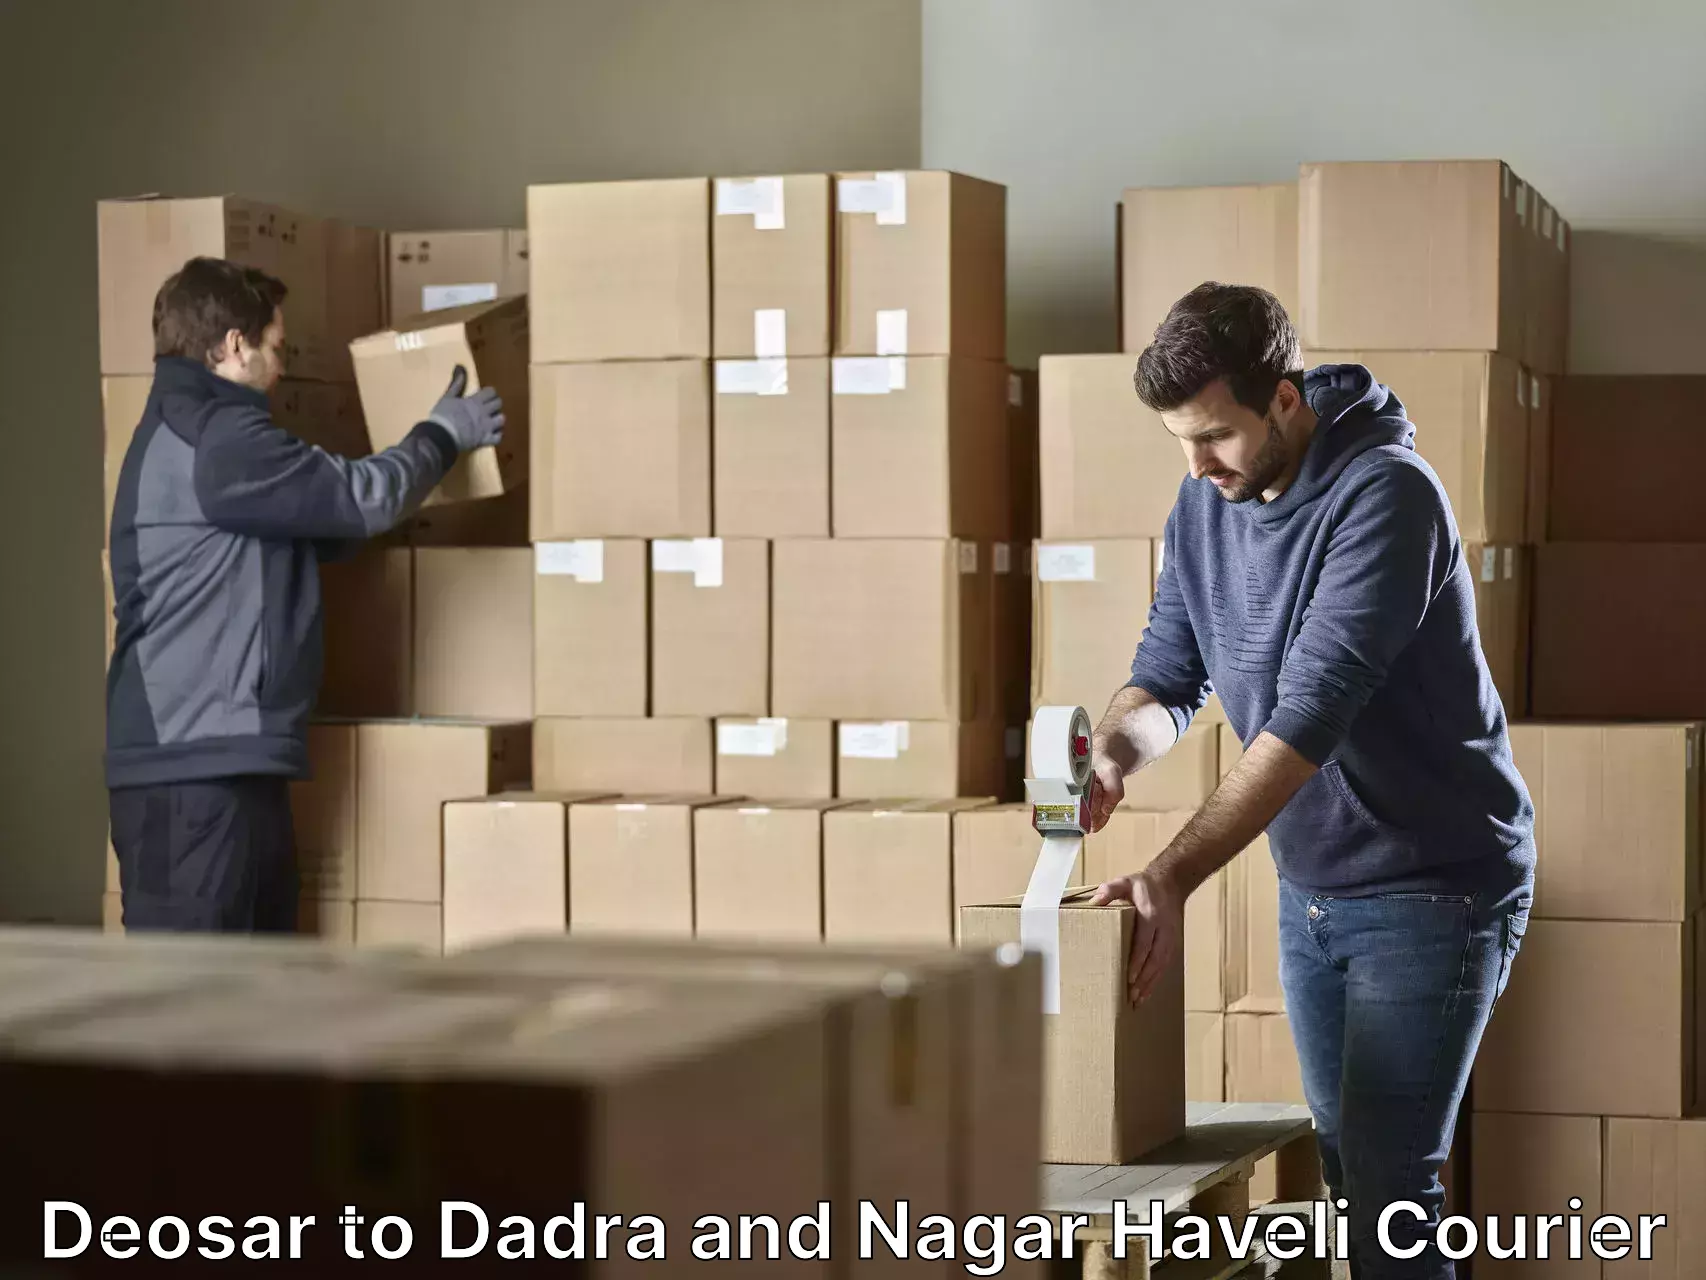 Furniture moving service in Deosar to Dadra and Nagar Haveli